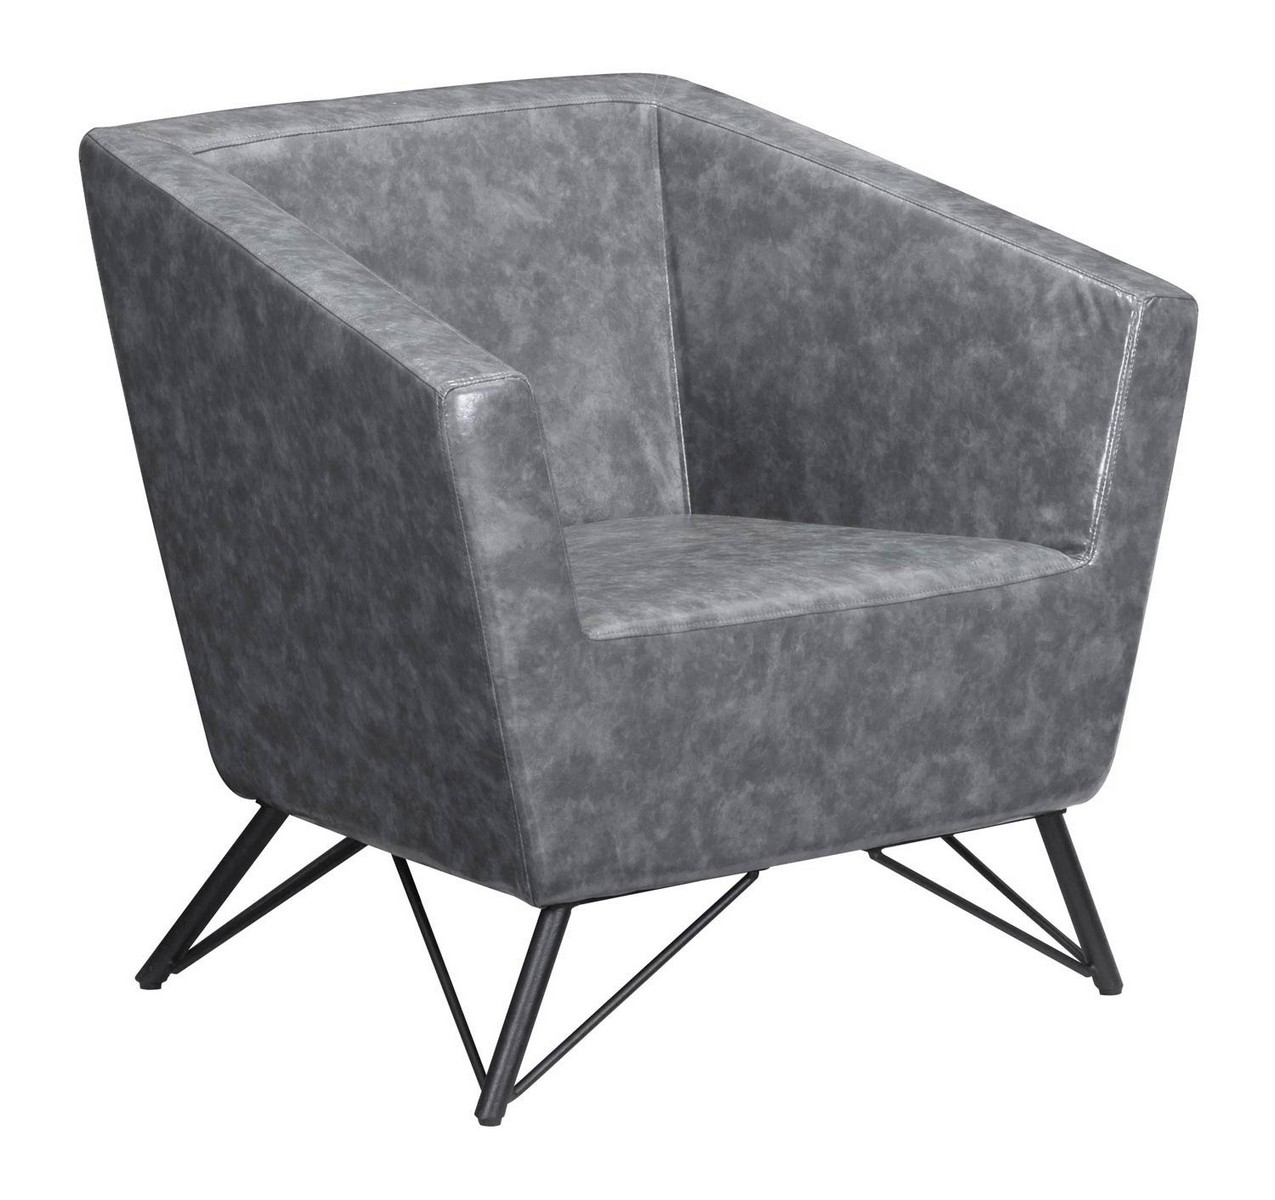 Zuo Modern Brussels Occasional Chair - Prussian Gray